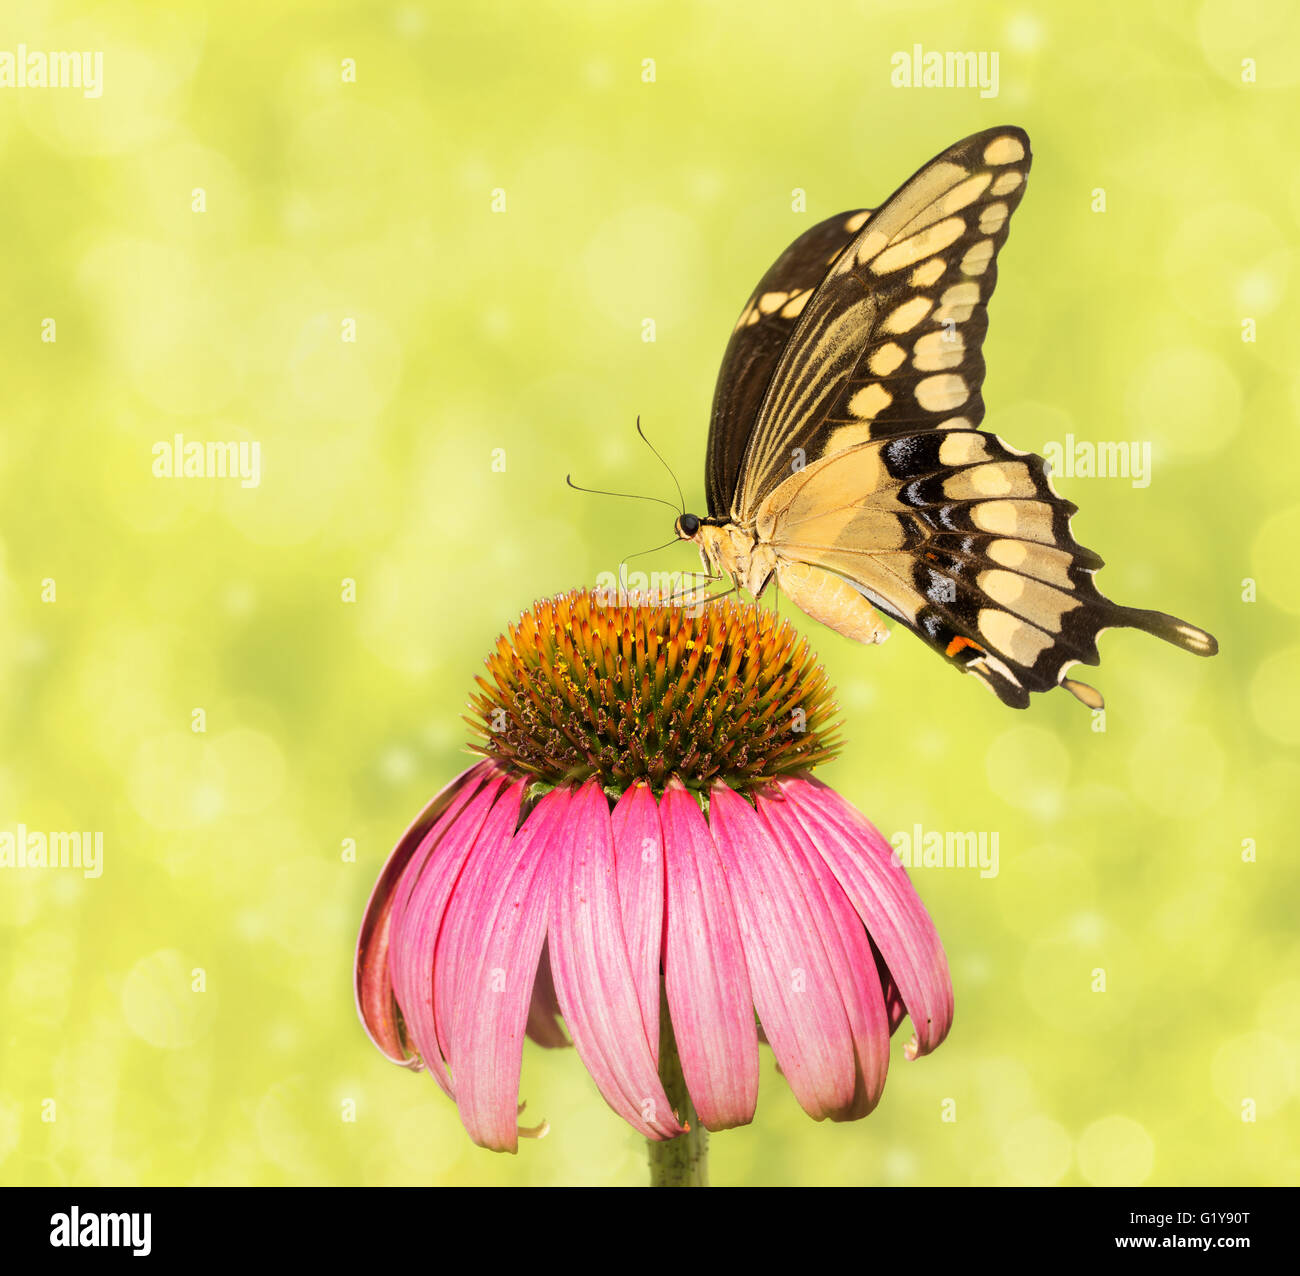 Dreamy image of a Giant Swallowtail butterfly on a Purple Coneflower Stock Photo